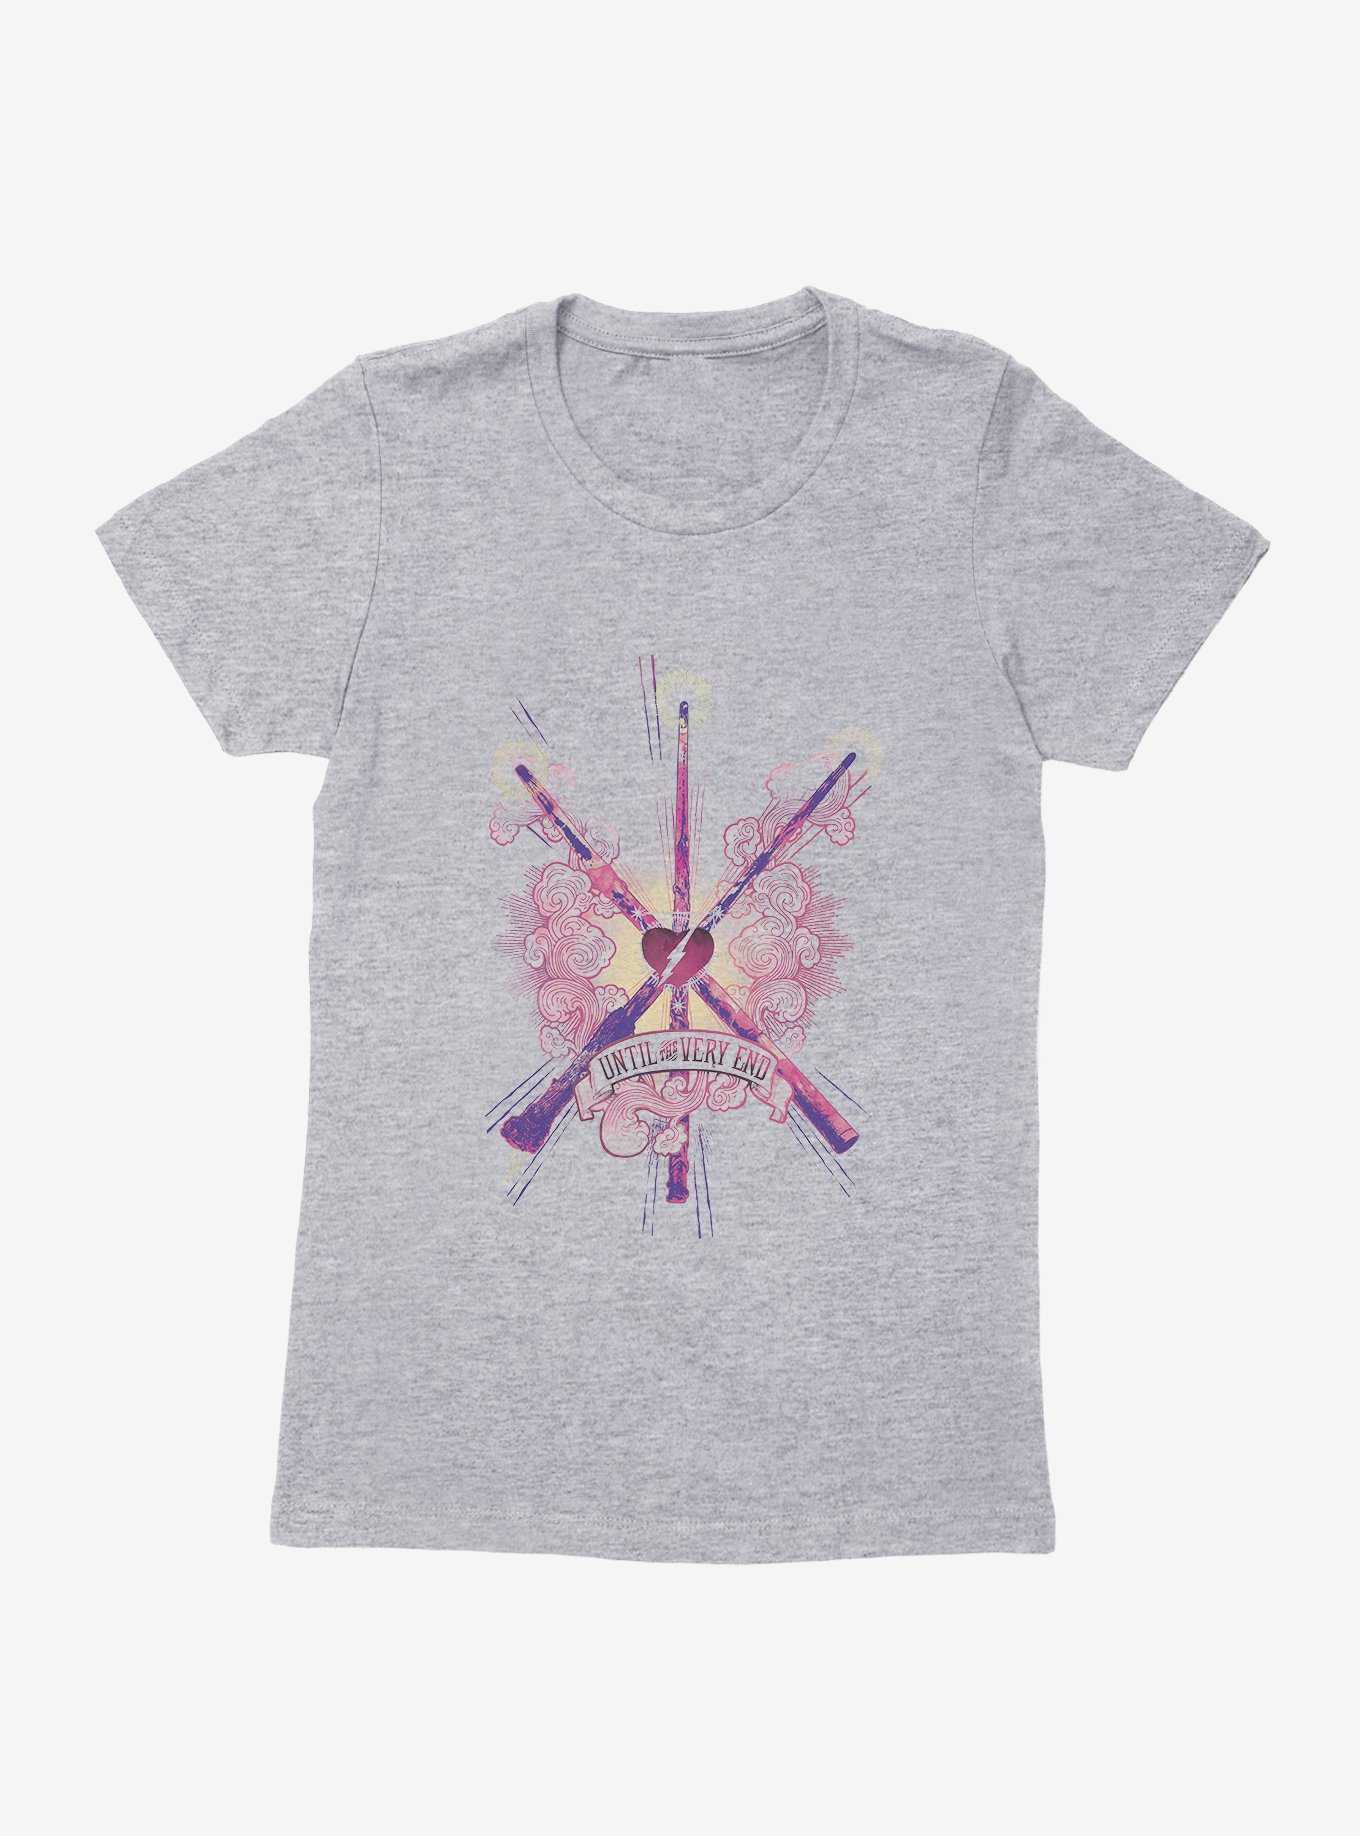 Harry Potter Until The Very End Wands Extra Soft Girls Heather Grey T-Shirt, , hi-res